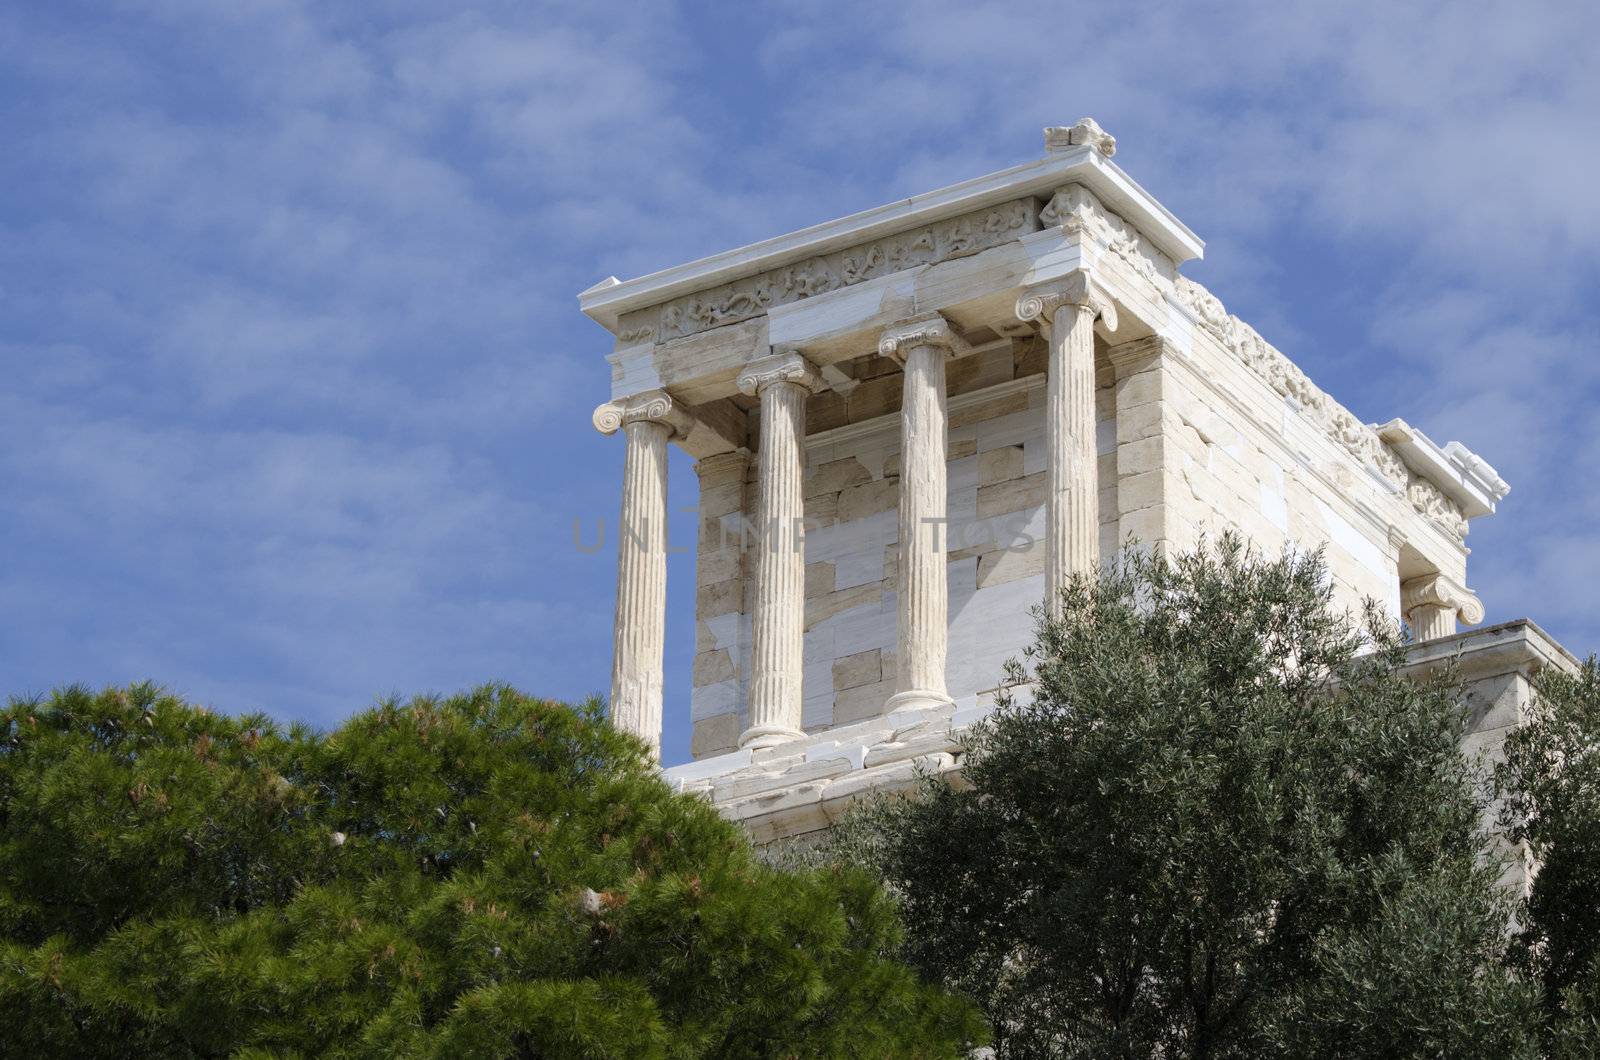 The temple of Athena Nike on the acropolis in athens.